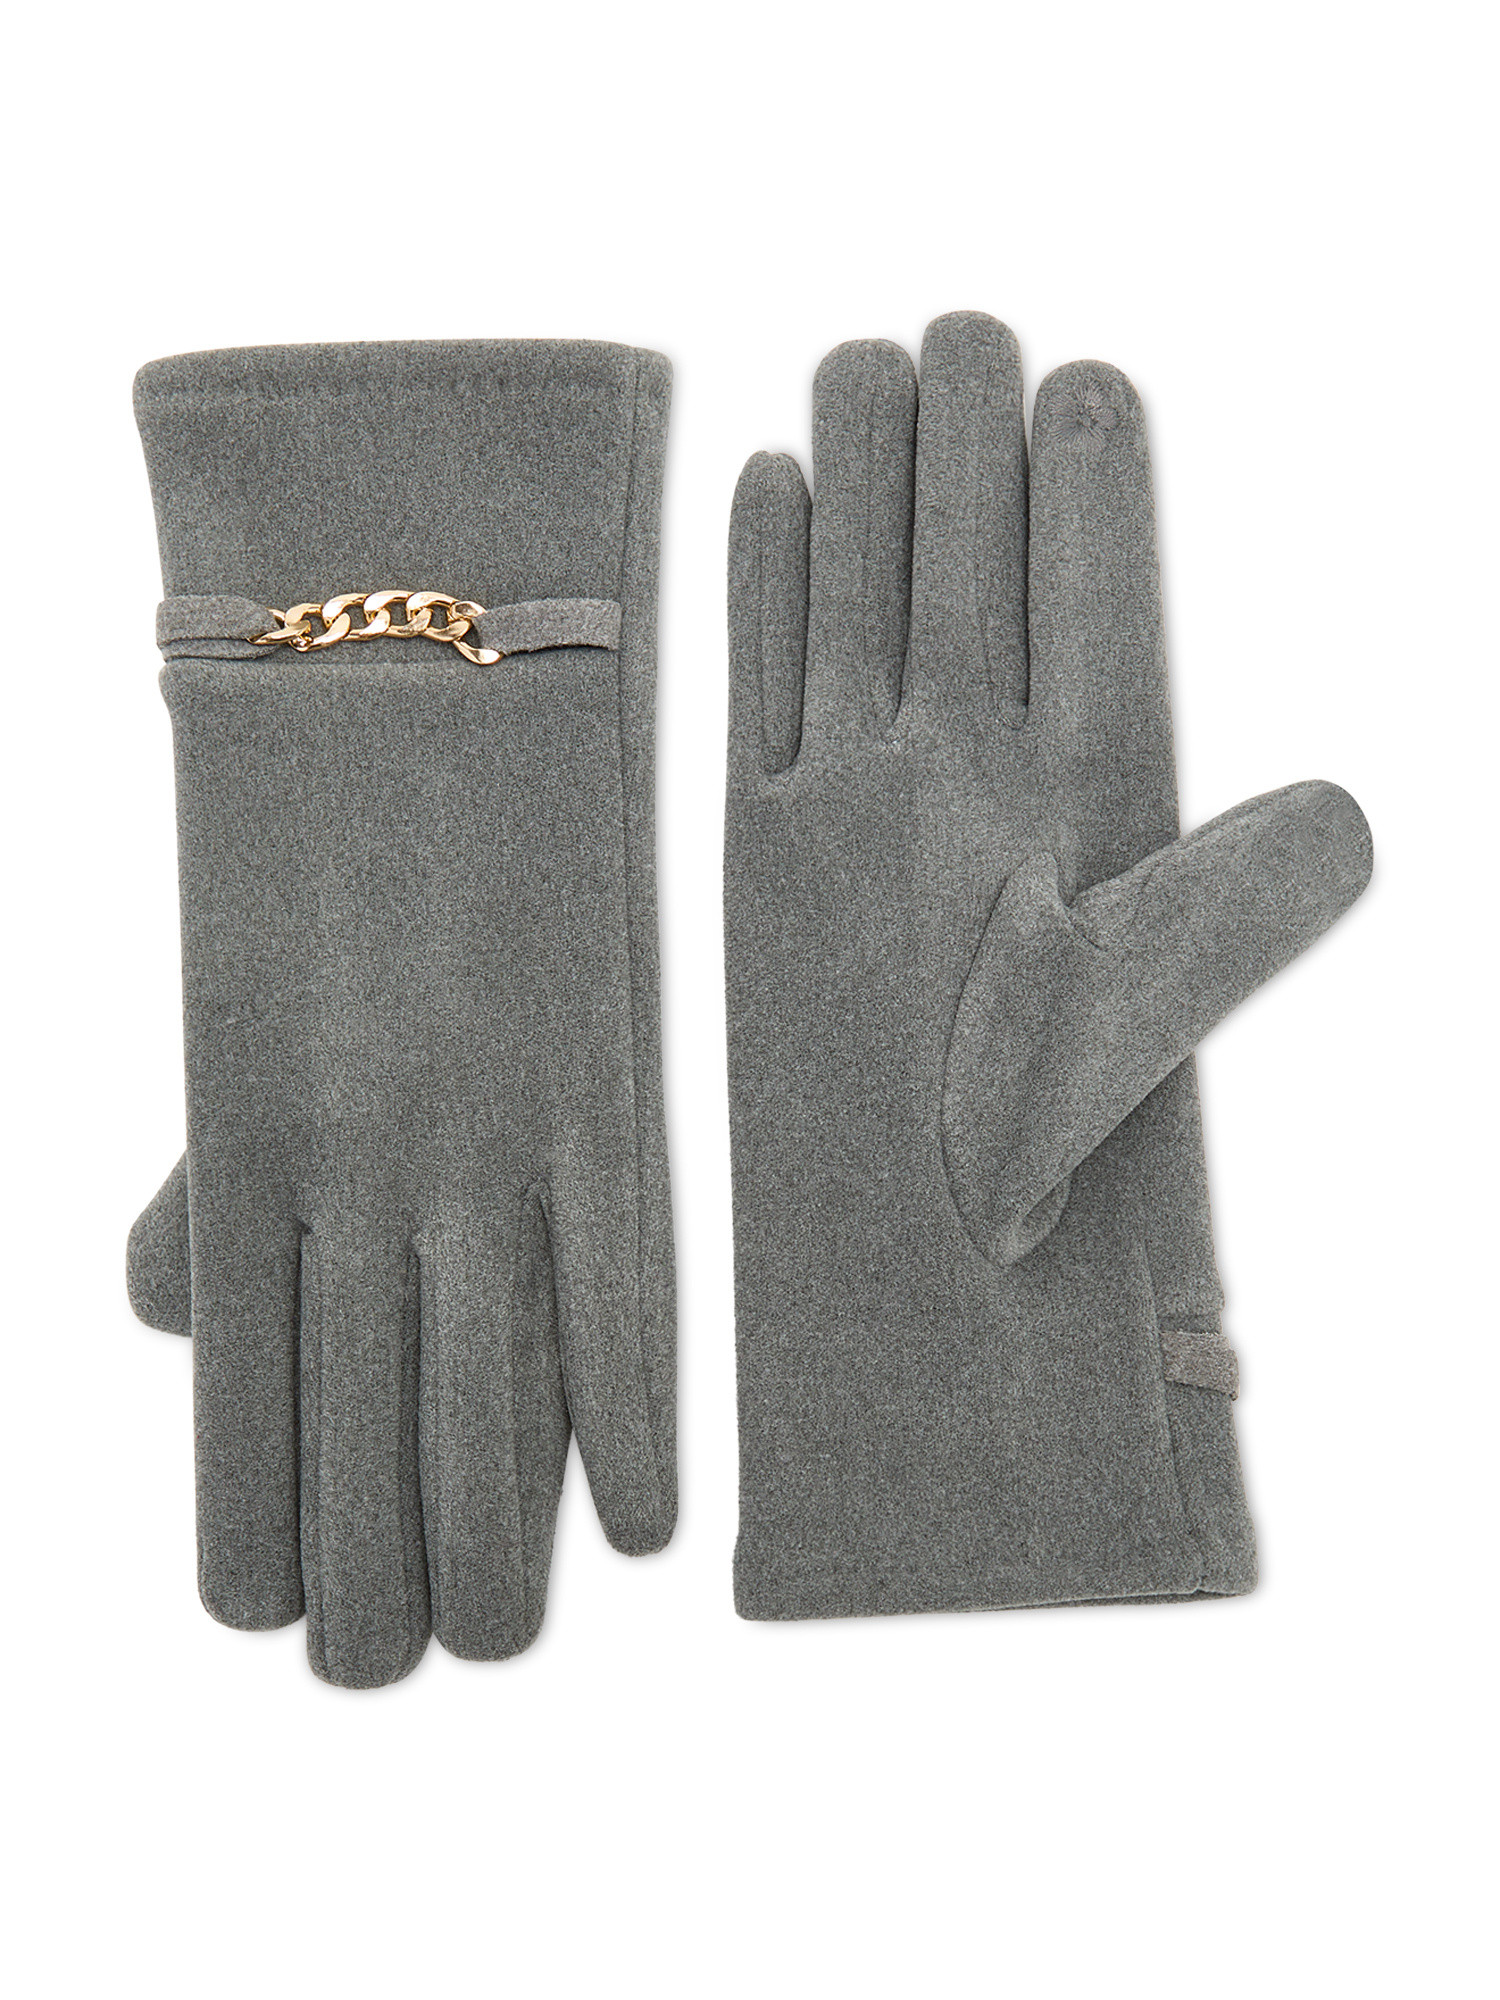 Koan - Micro fiber gloves with chain, Grey, large image number 0